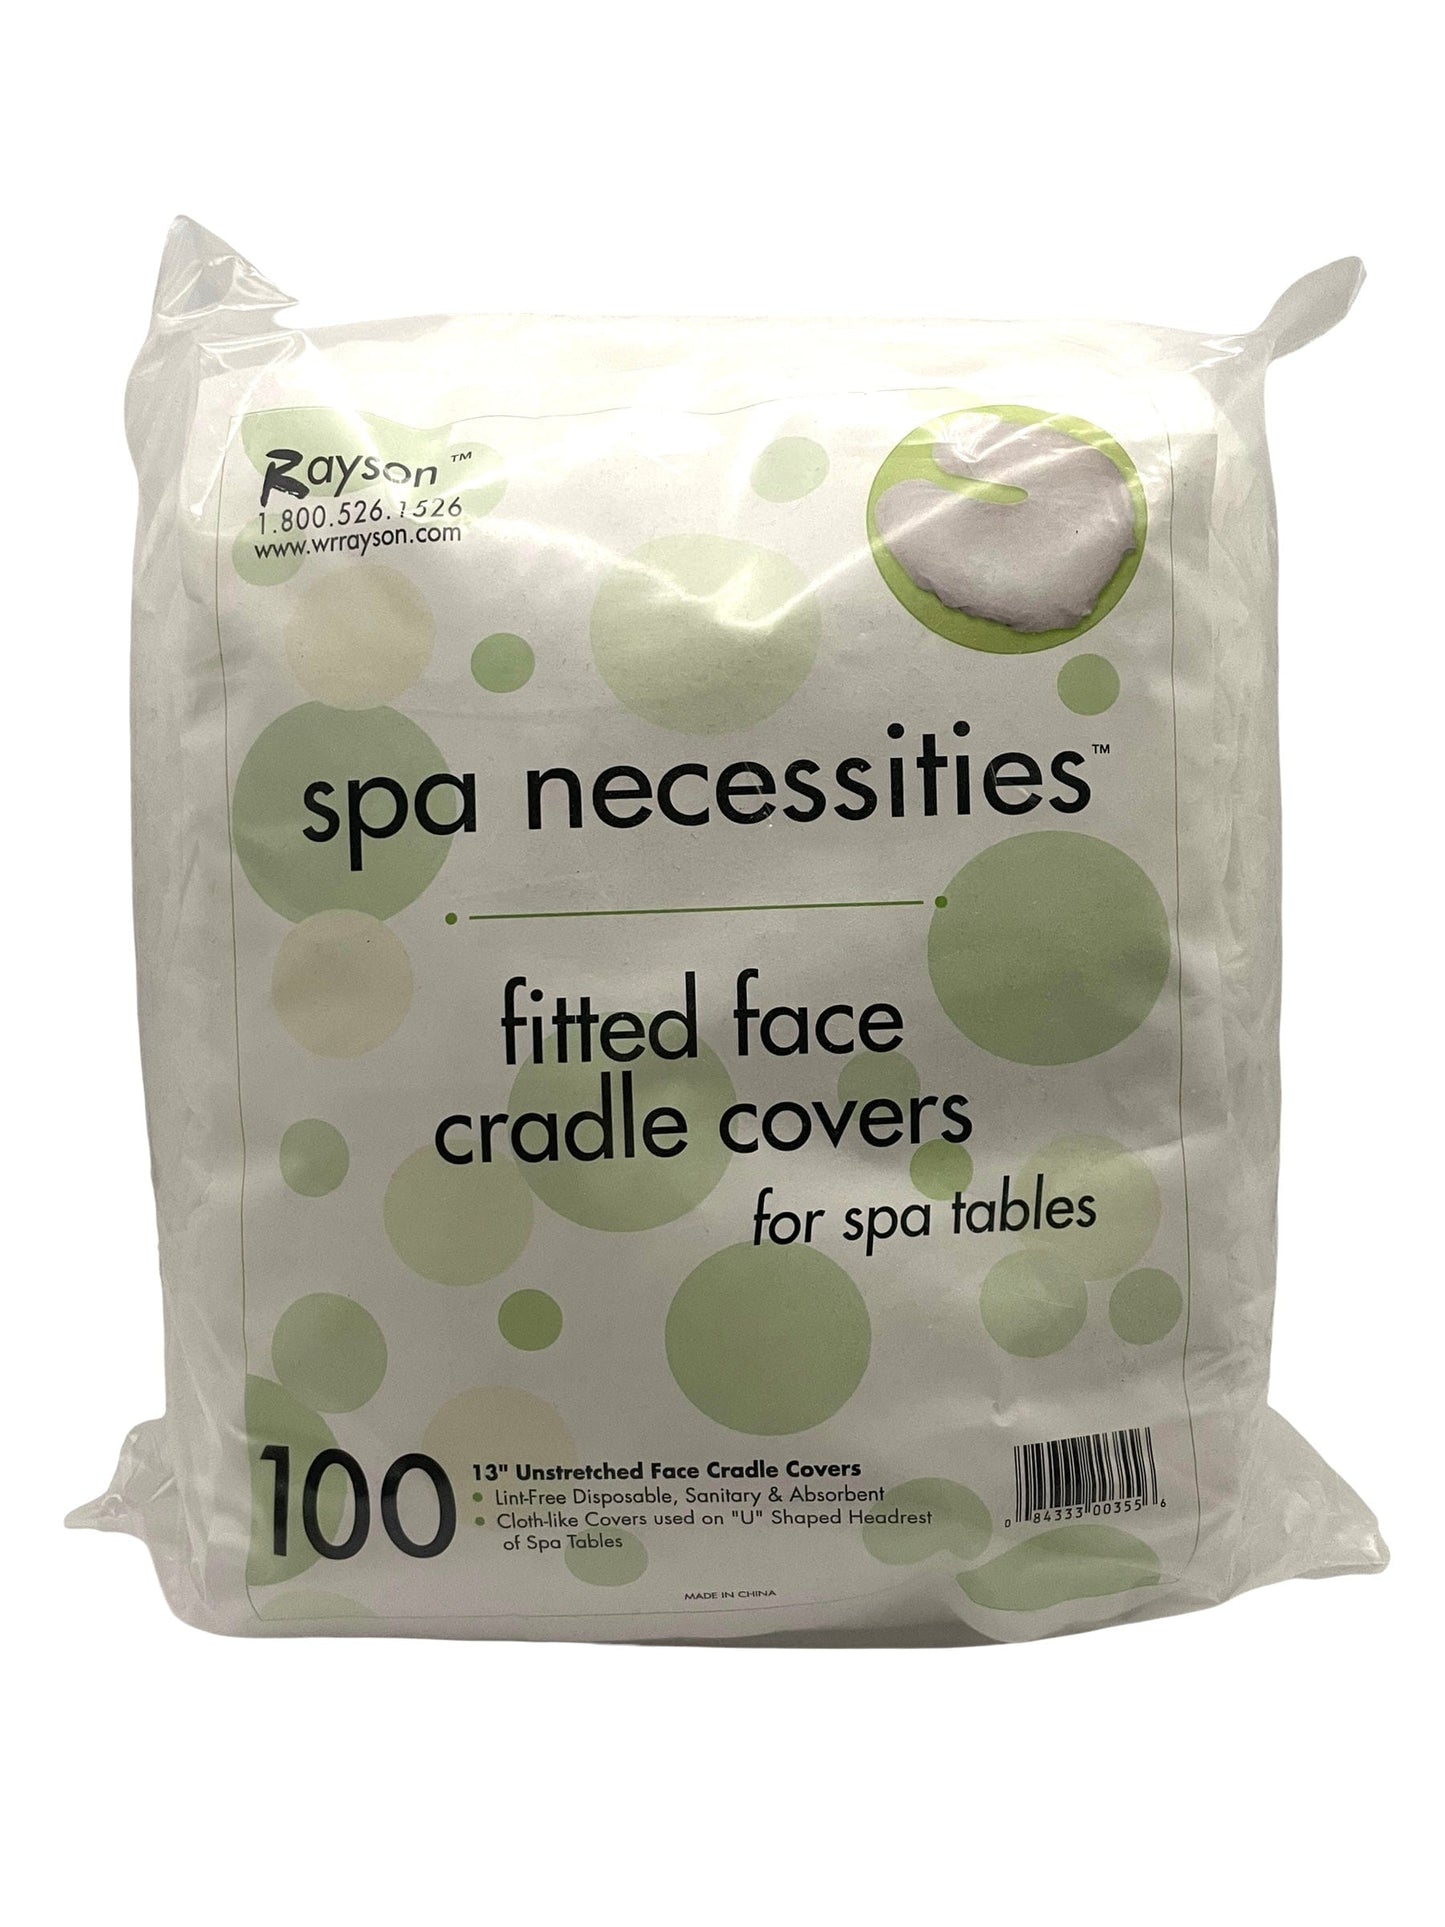 Fitted Face Cradle Covers Spa Tables Disposable 100 pk 13" Cradle Covers